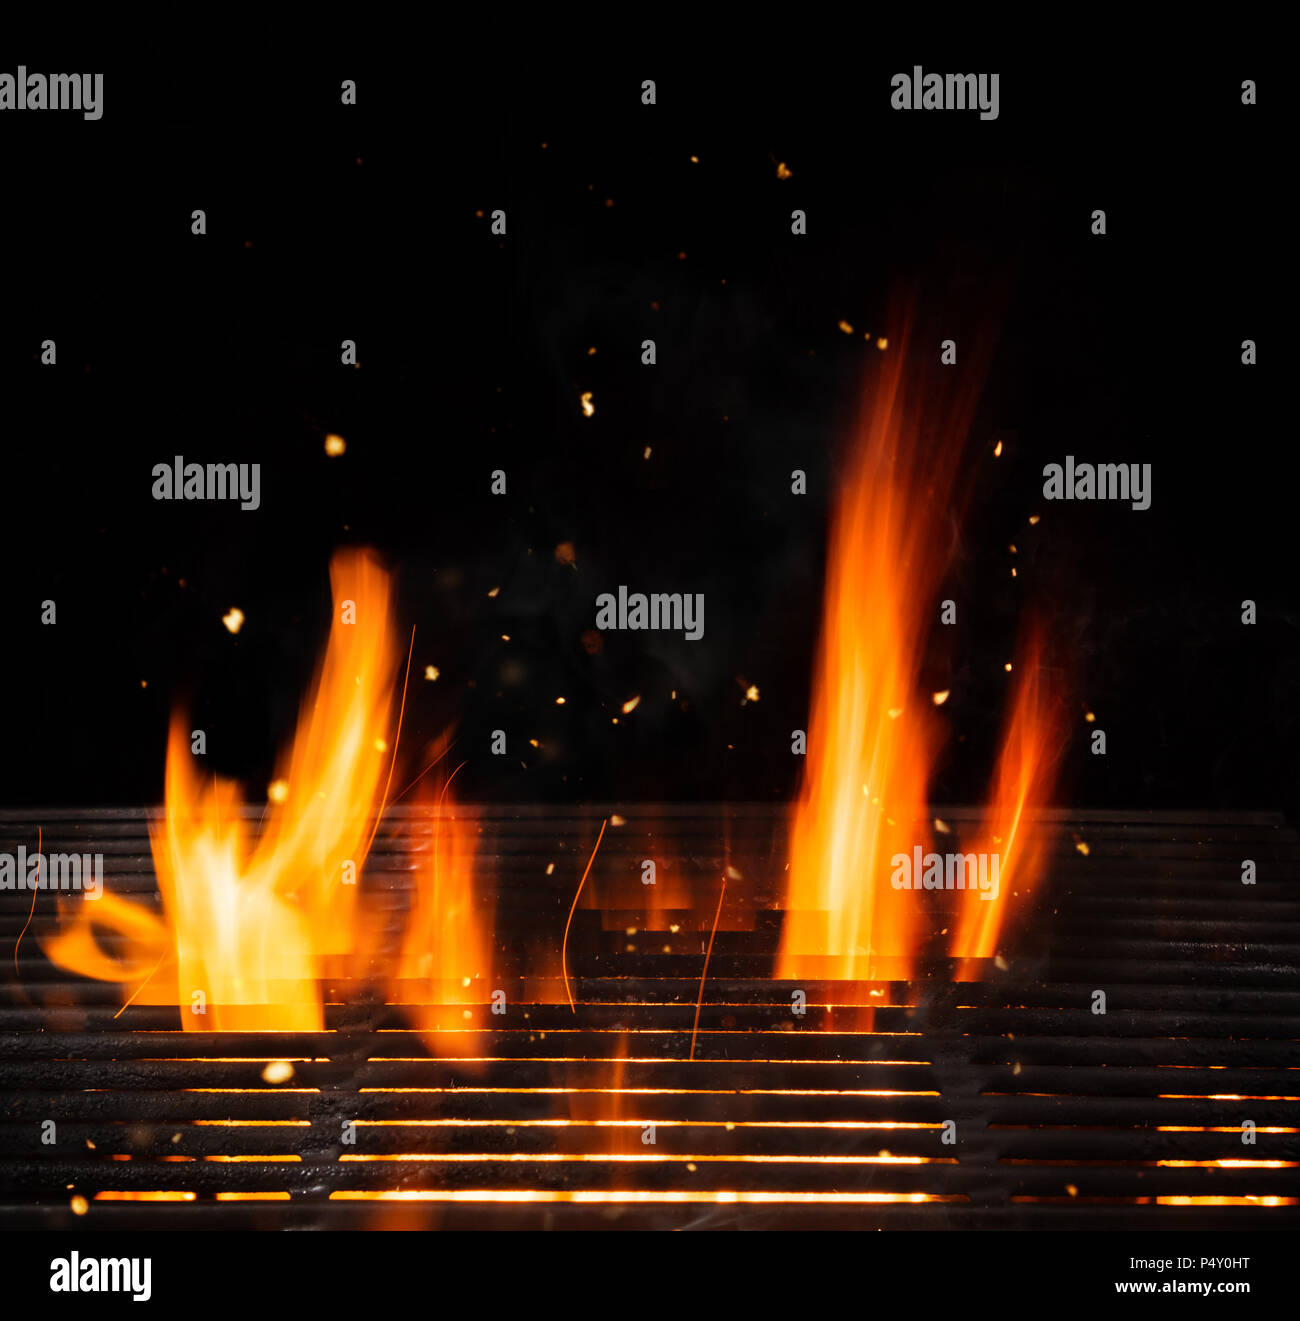 Empty grill with cast-iron and flames, ideal for product placement. Very high resolution image Stock Photo